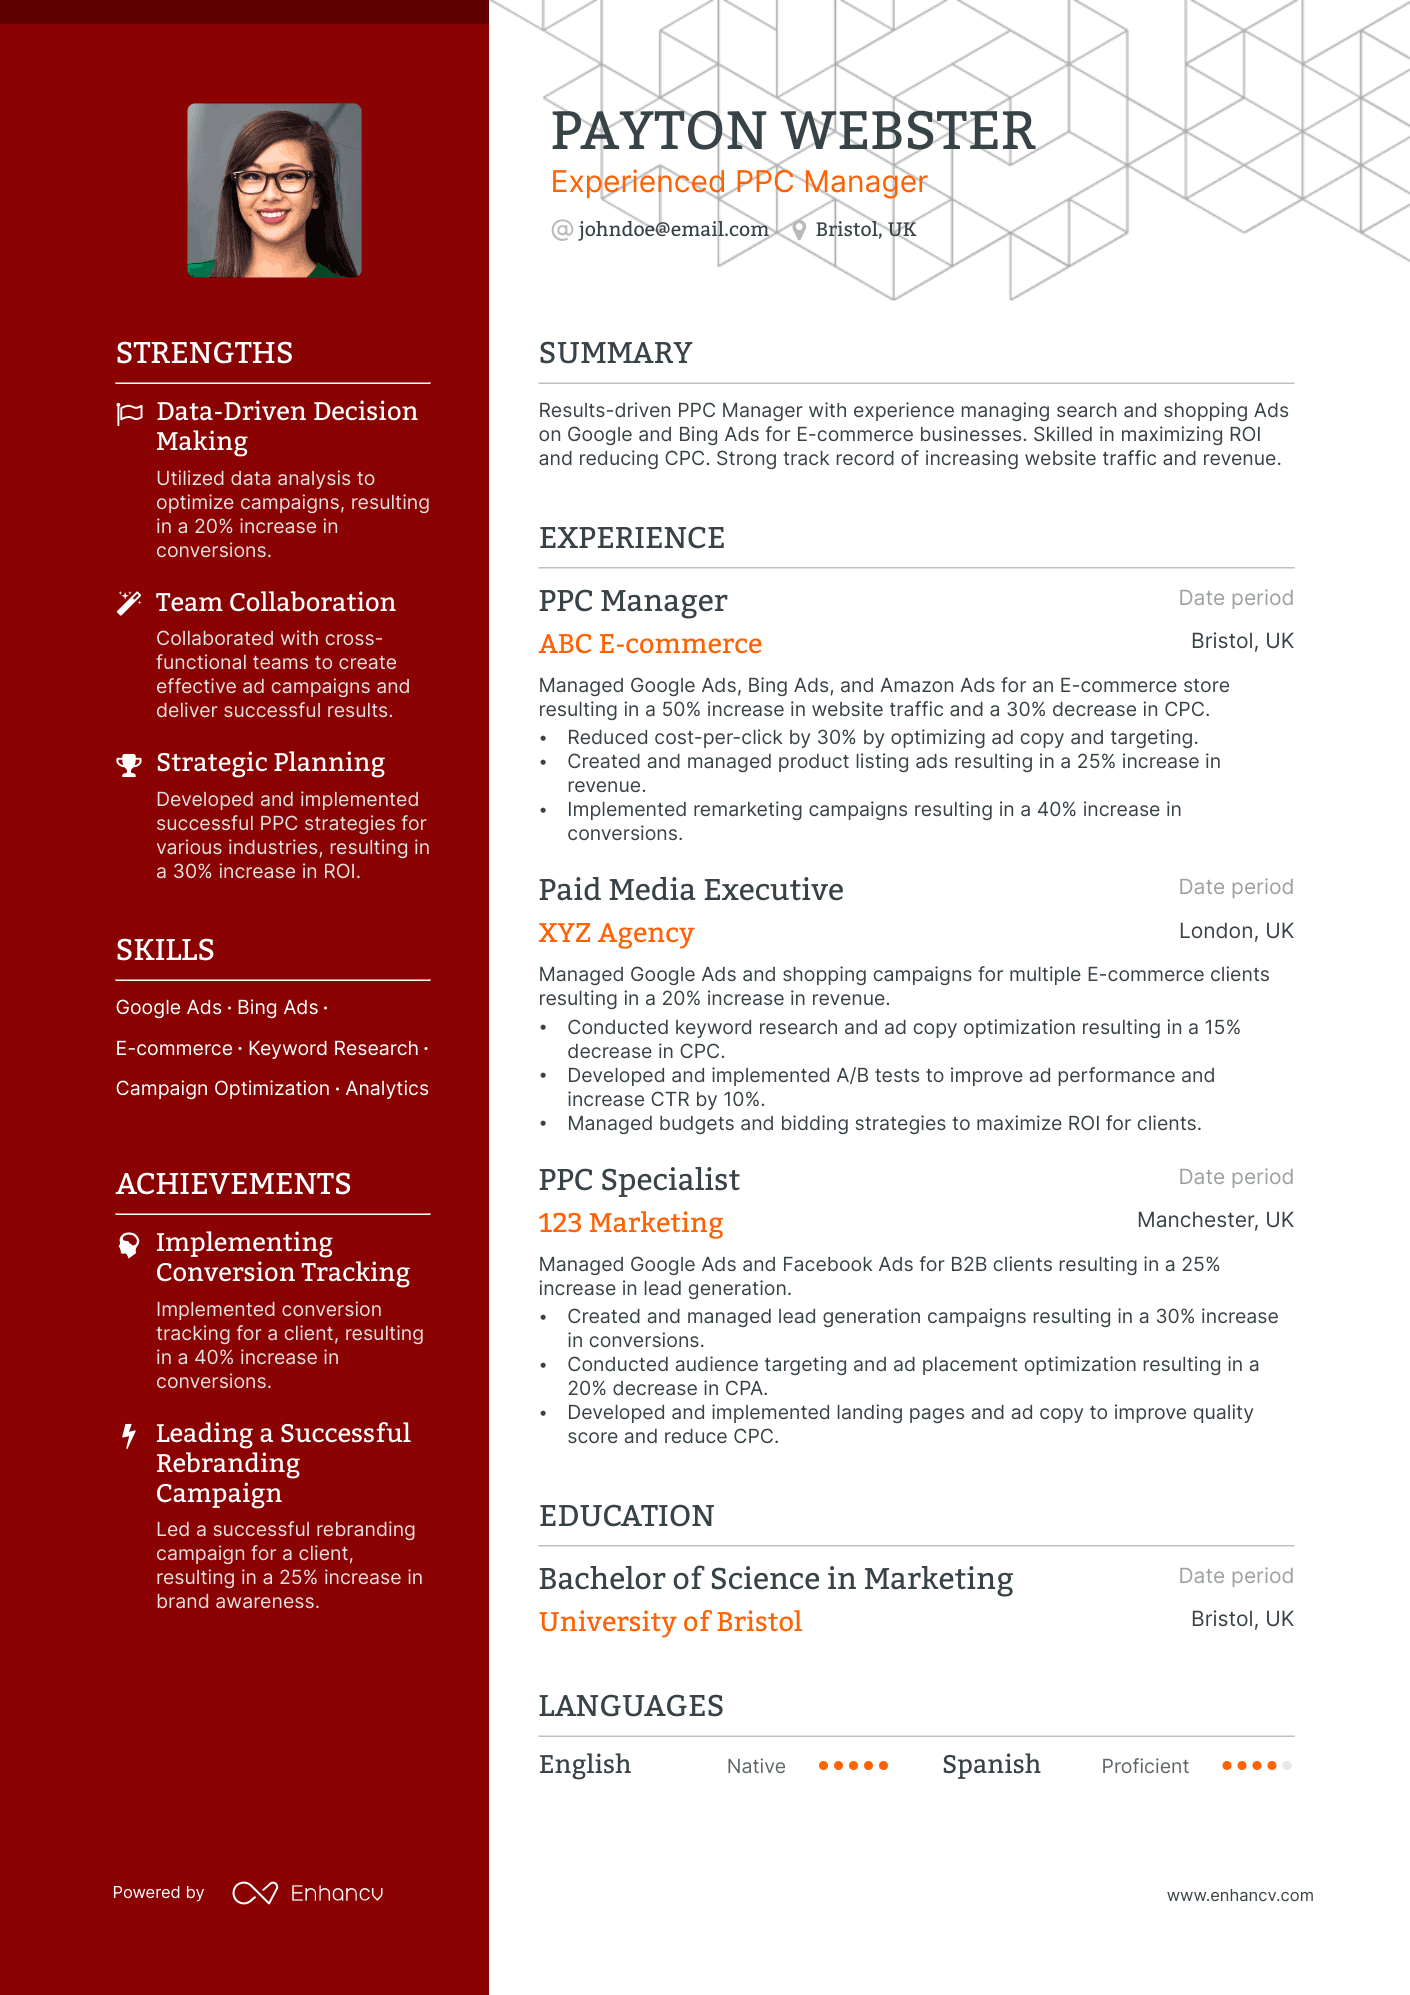 PPC Manager resume example